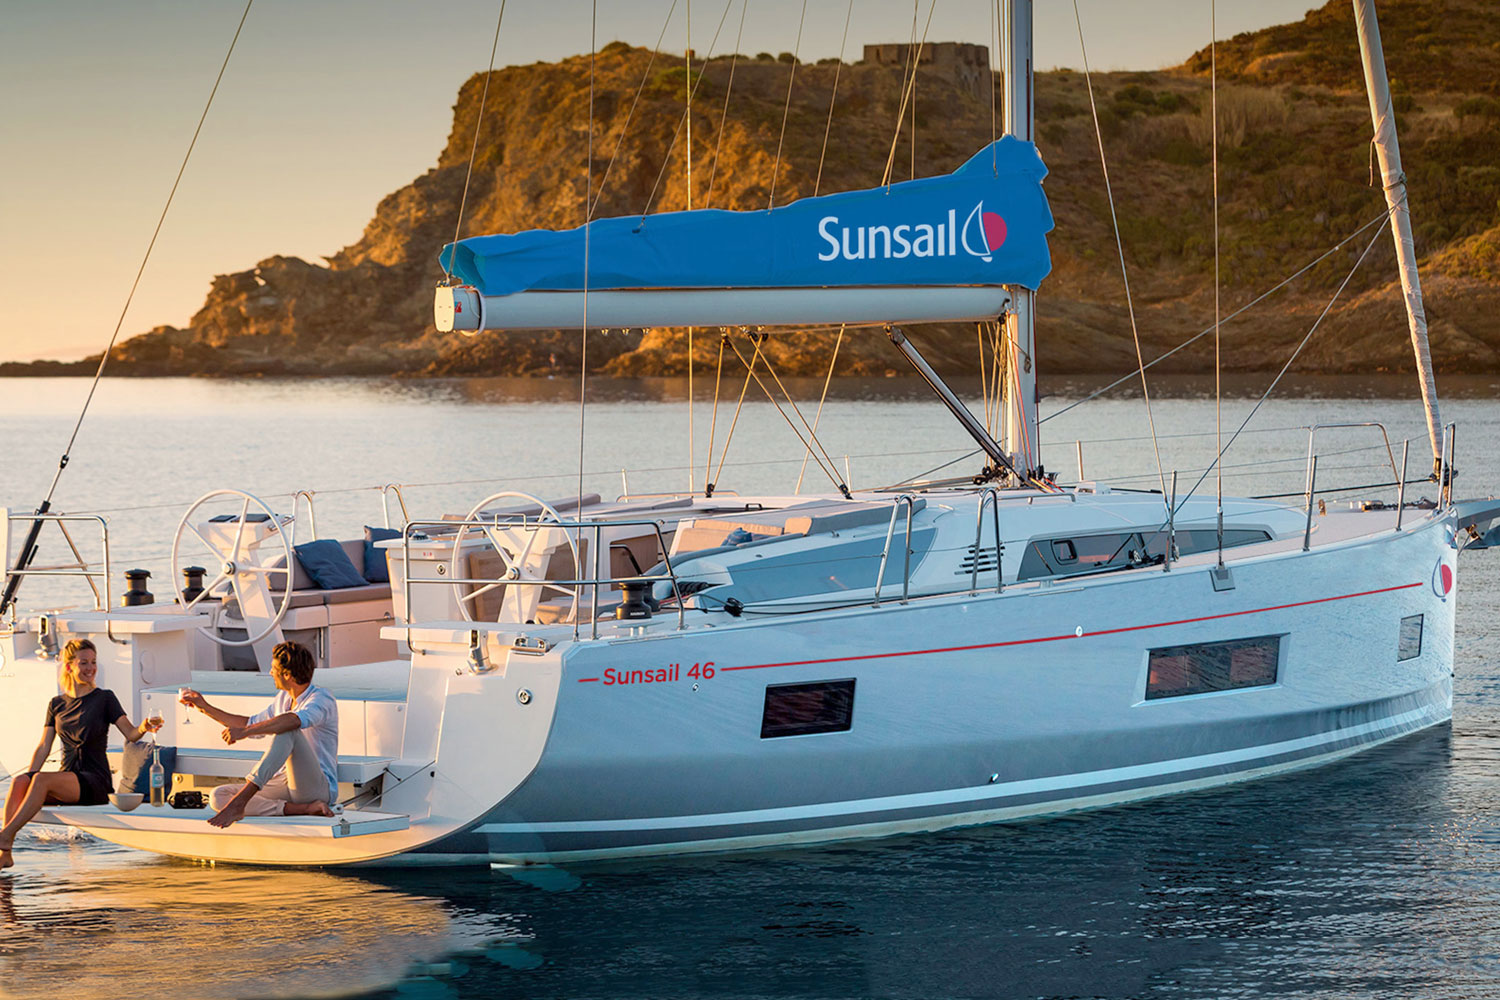 sunsail yacht ownership prices